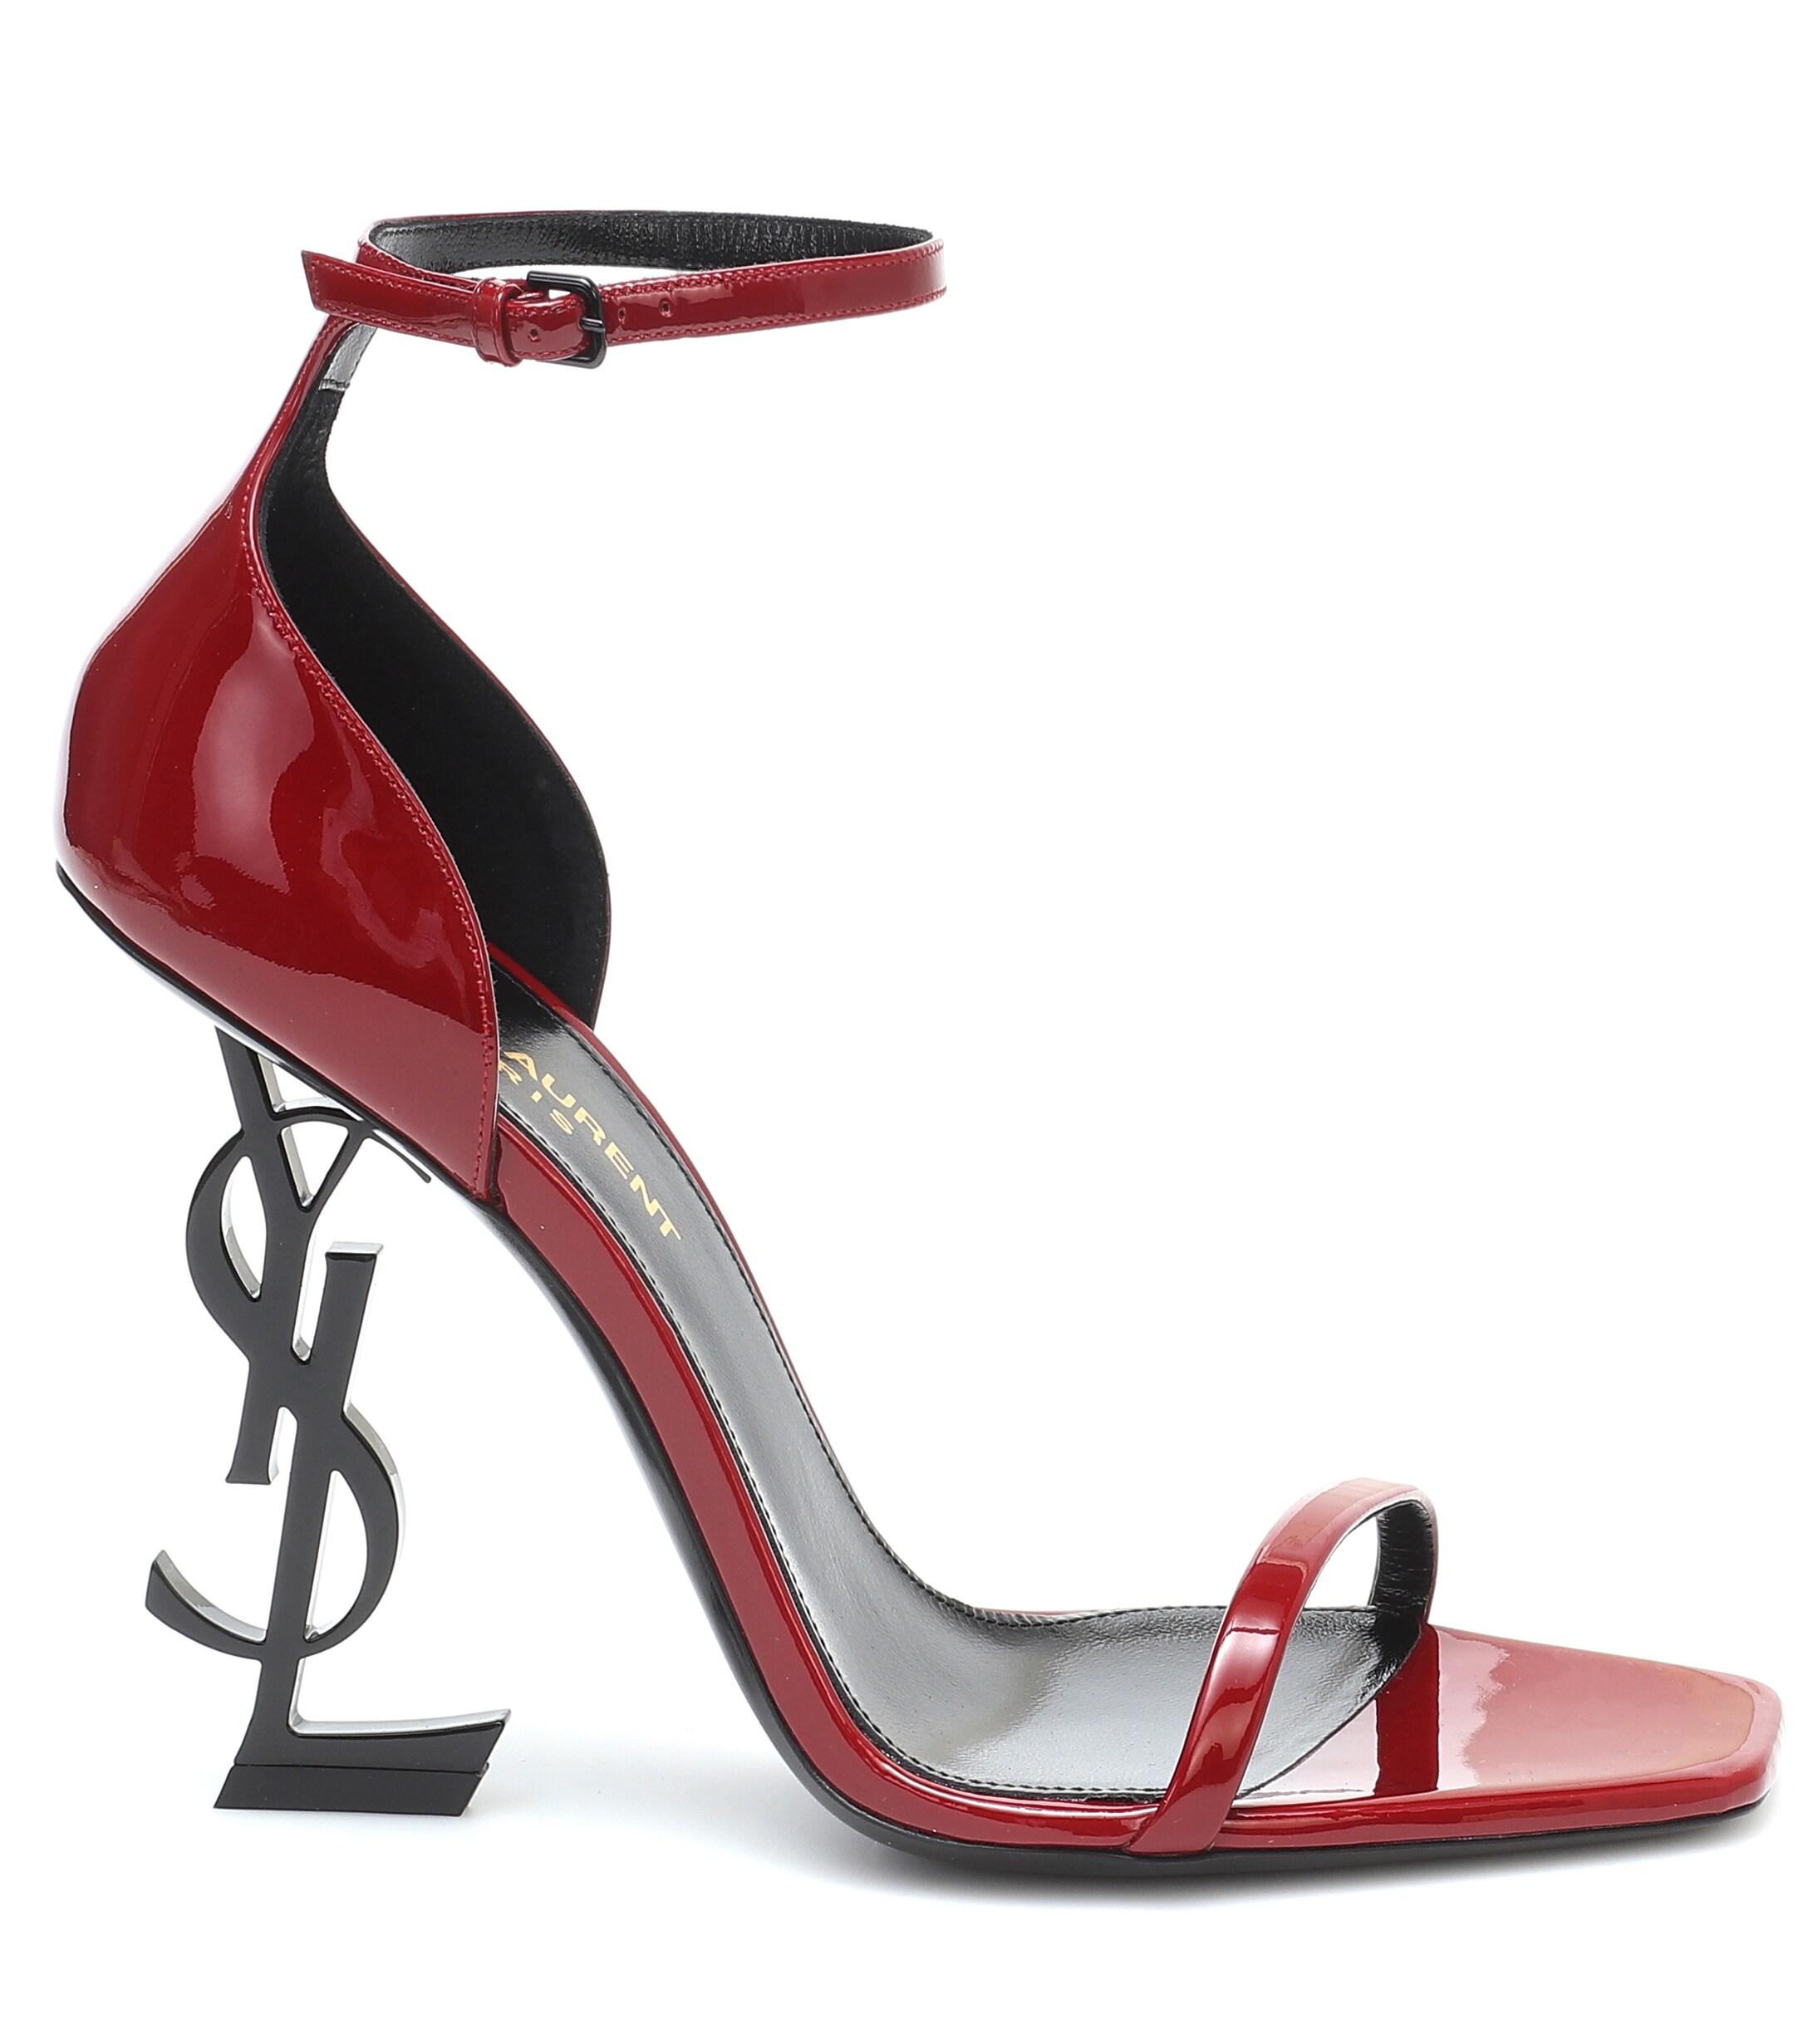 Saint Laurent Opyum Patent Leather Sandals in Red | Lyst